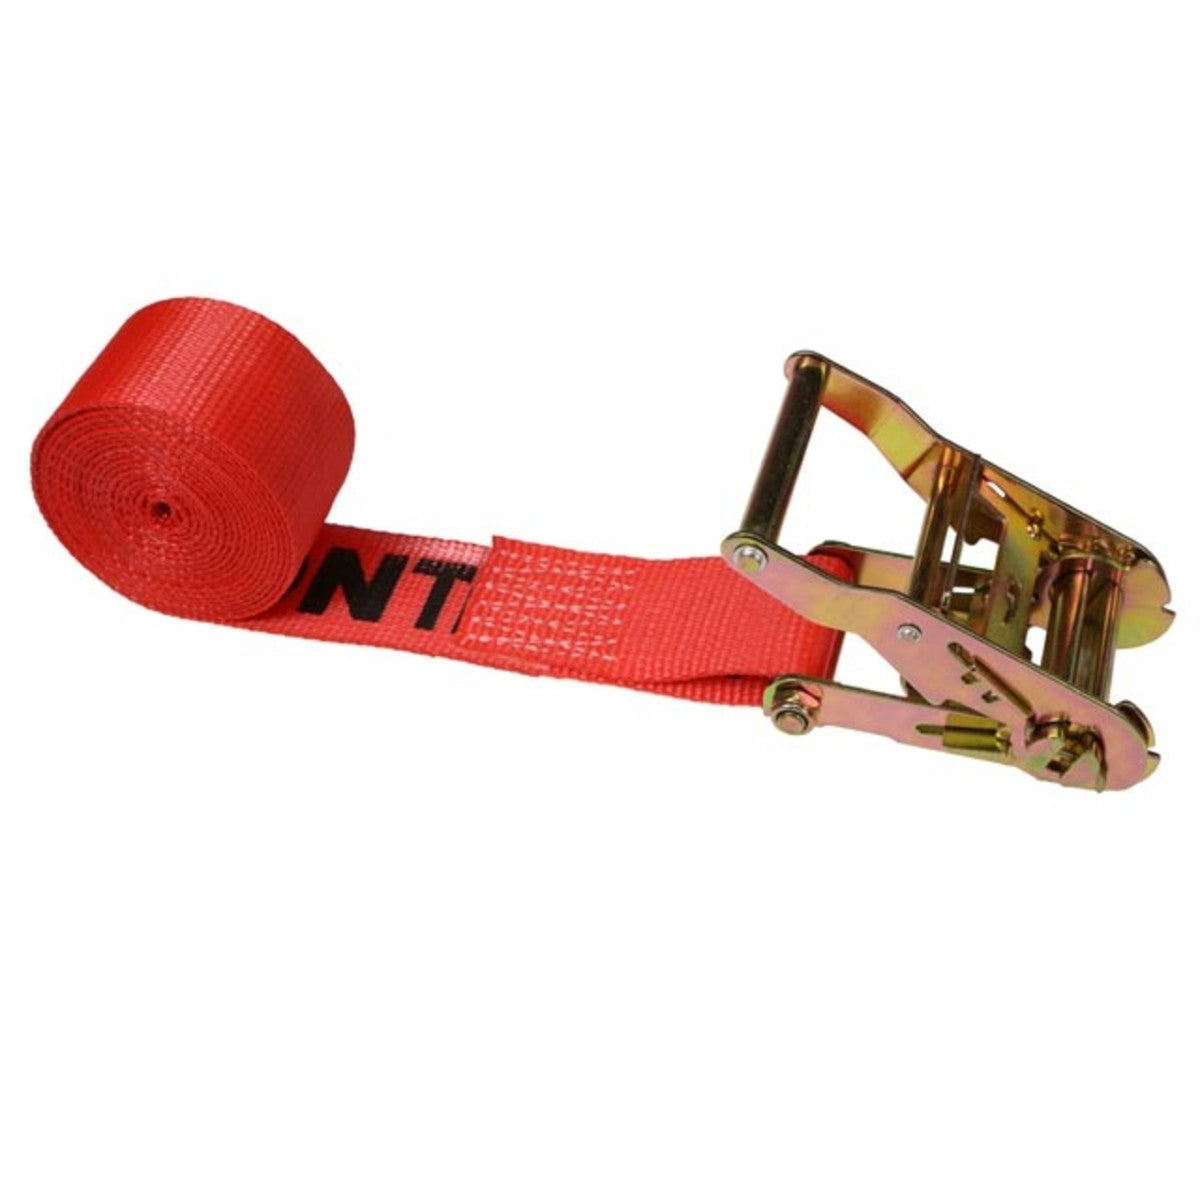 2" x 10' Red Endless Ratchet Strap